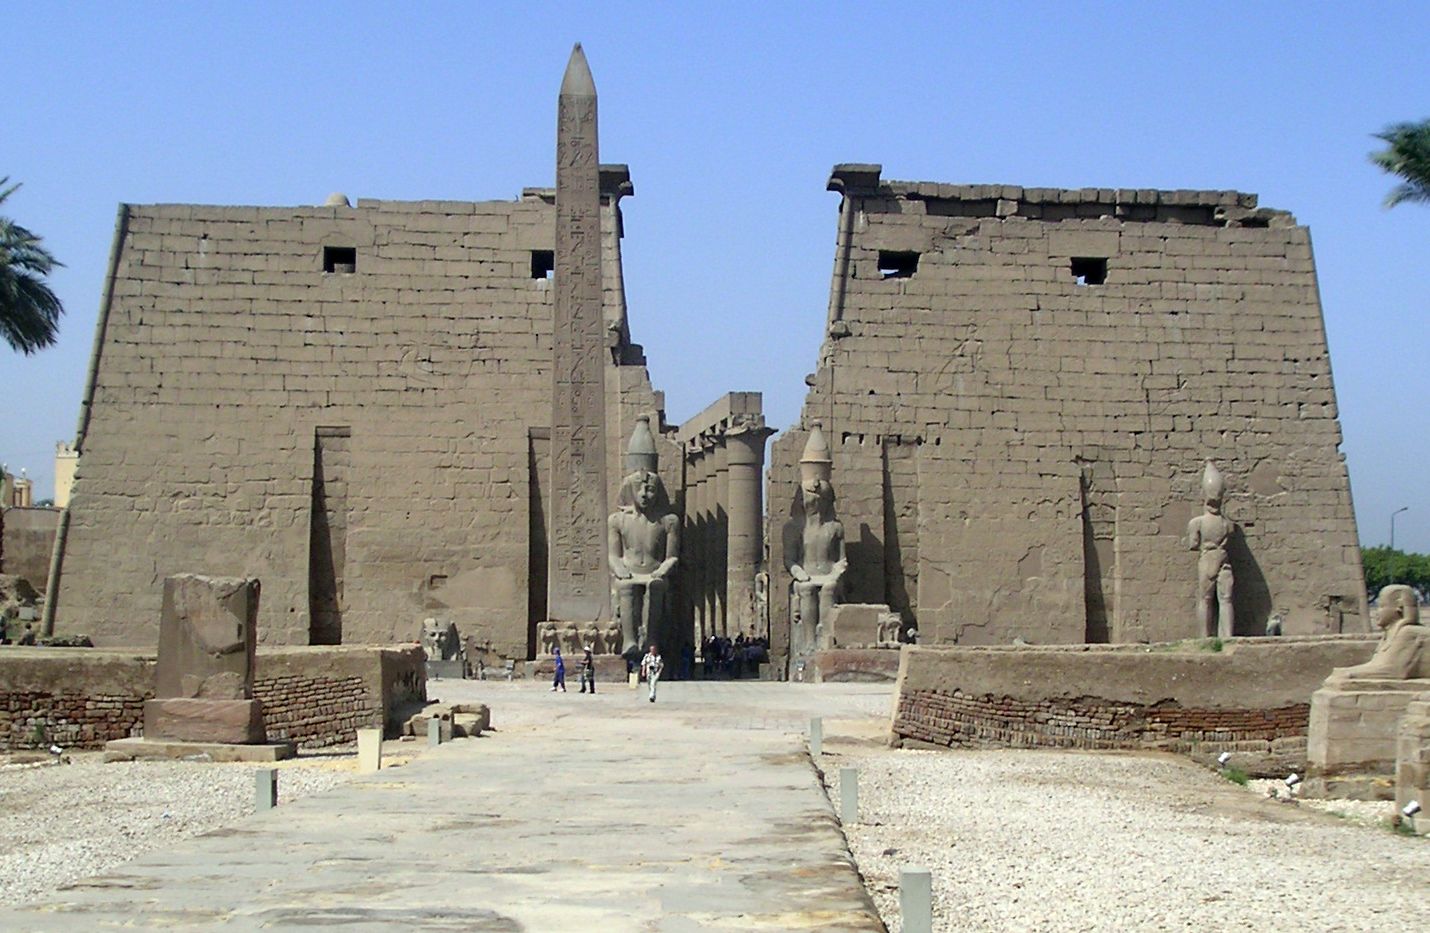 Obelisk at Luxor (the ancient Egyptian city of Thebes), where Ammianus Marcellinus described hieroglyphs in his Res Gestae.   